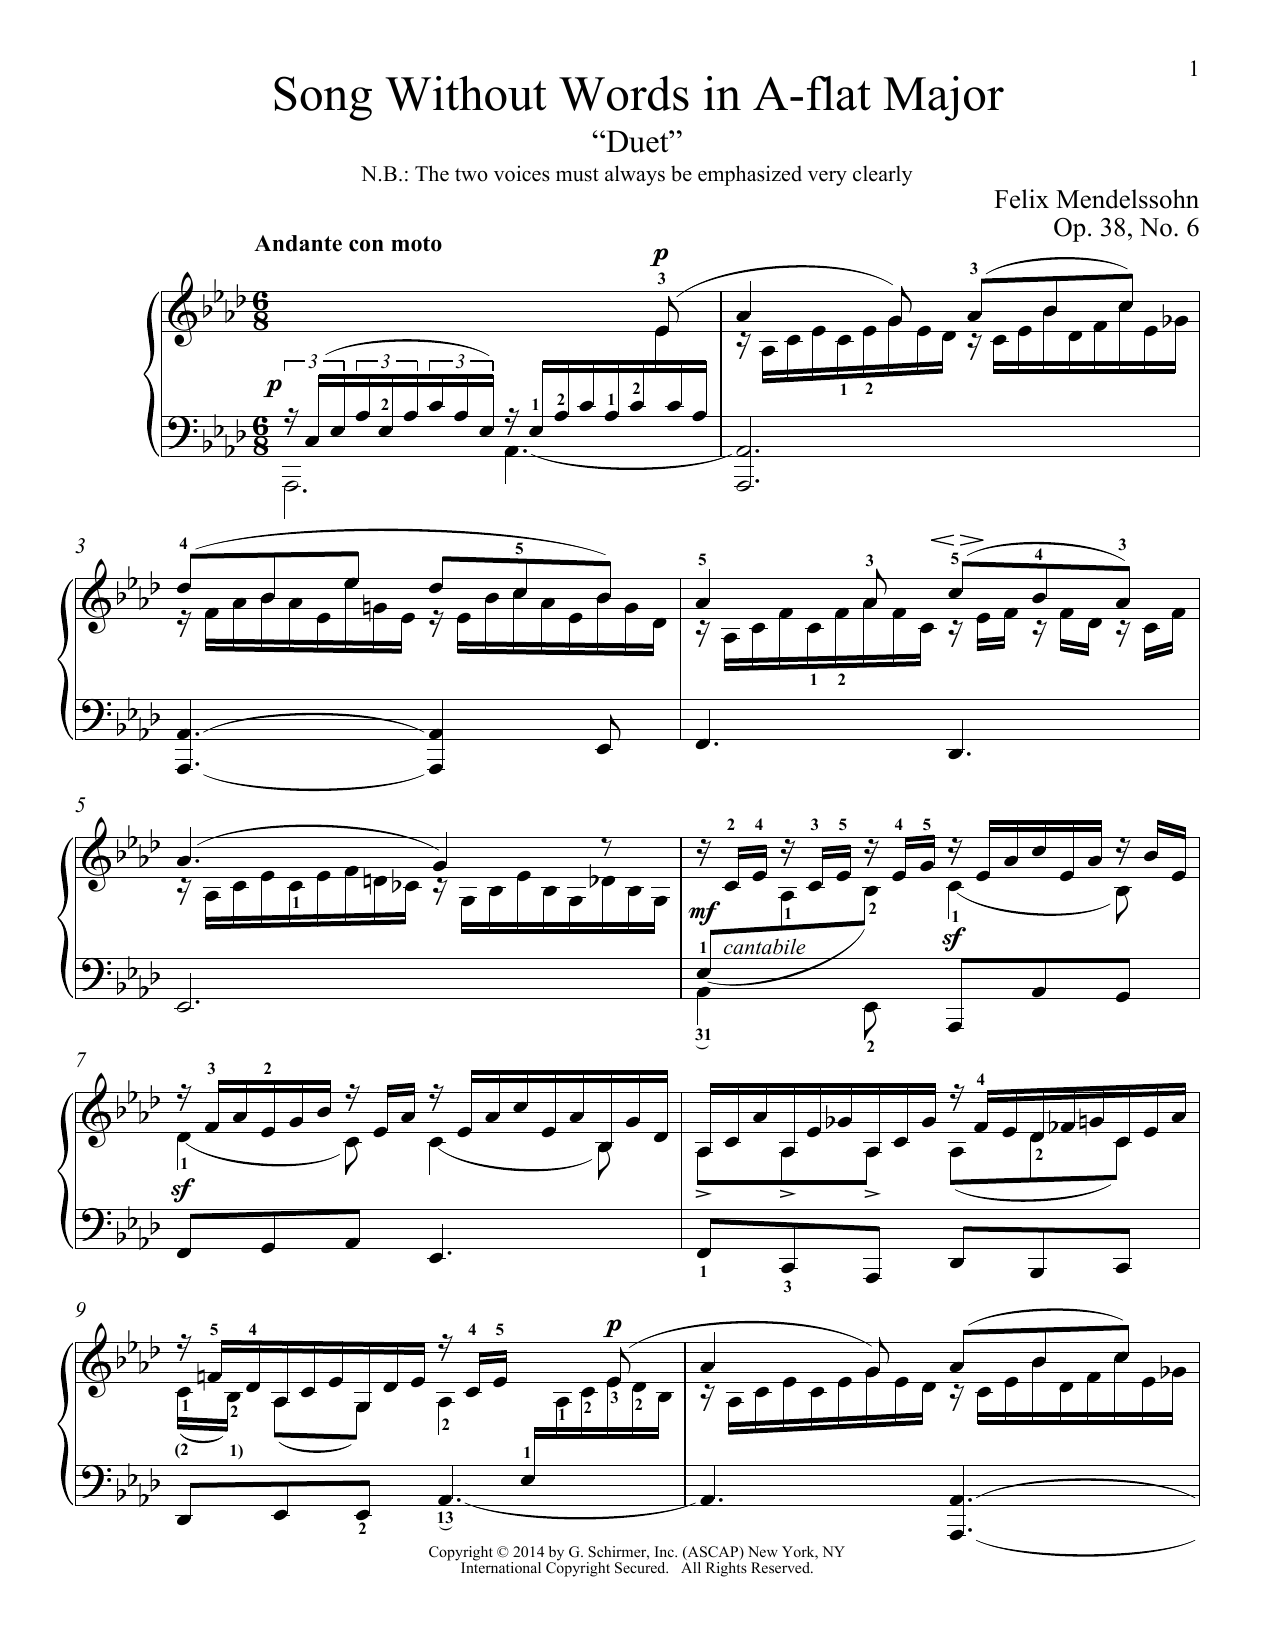 Download Immanuela Gruenberg Song Without Words In A-Flat Major, 